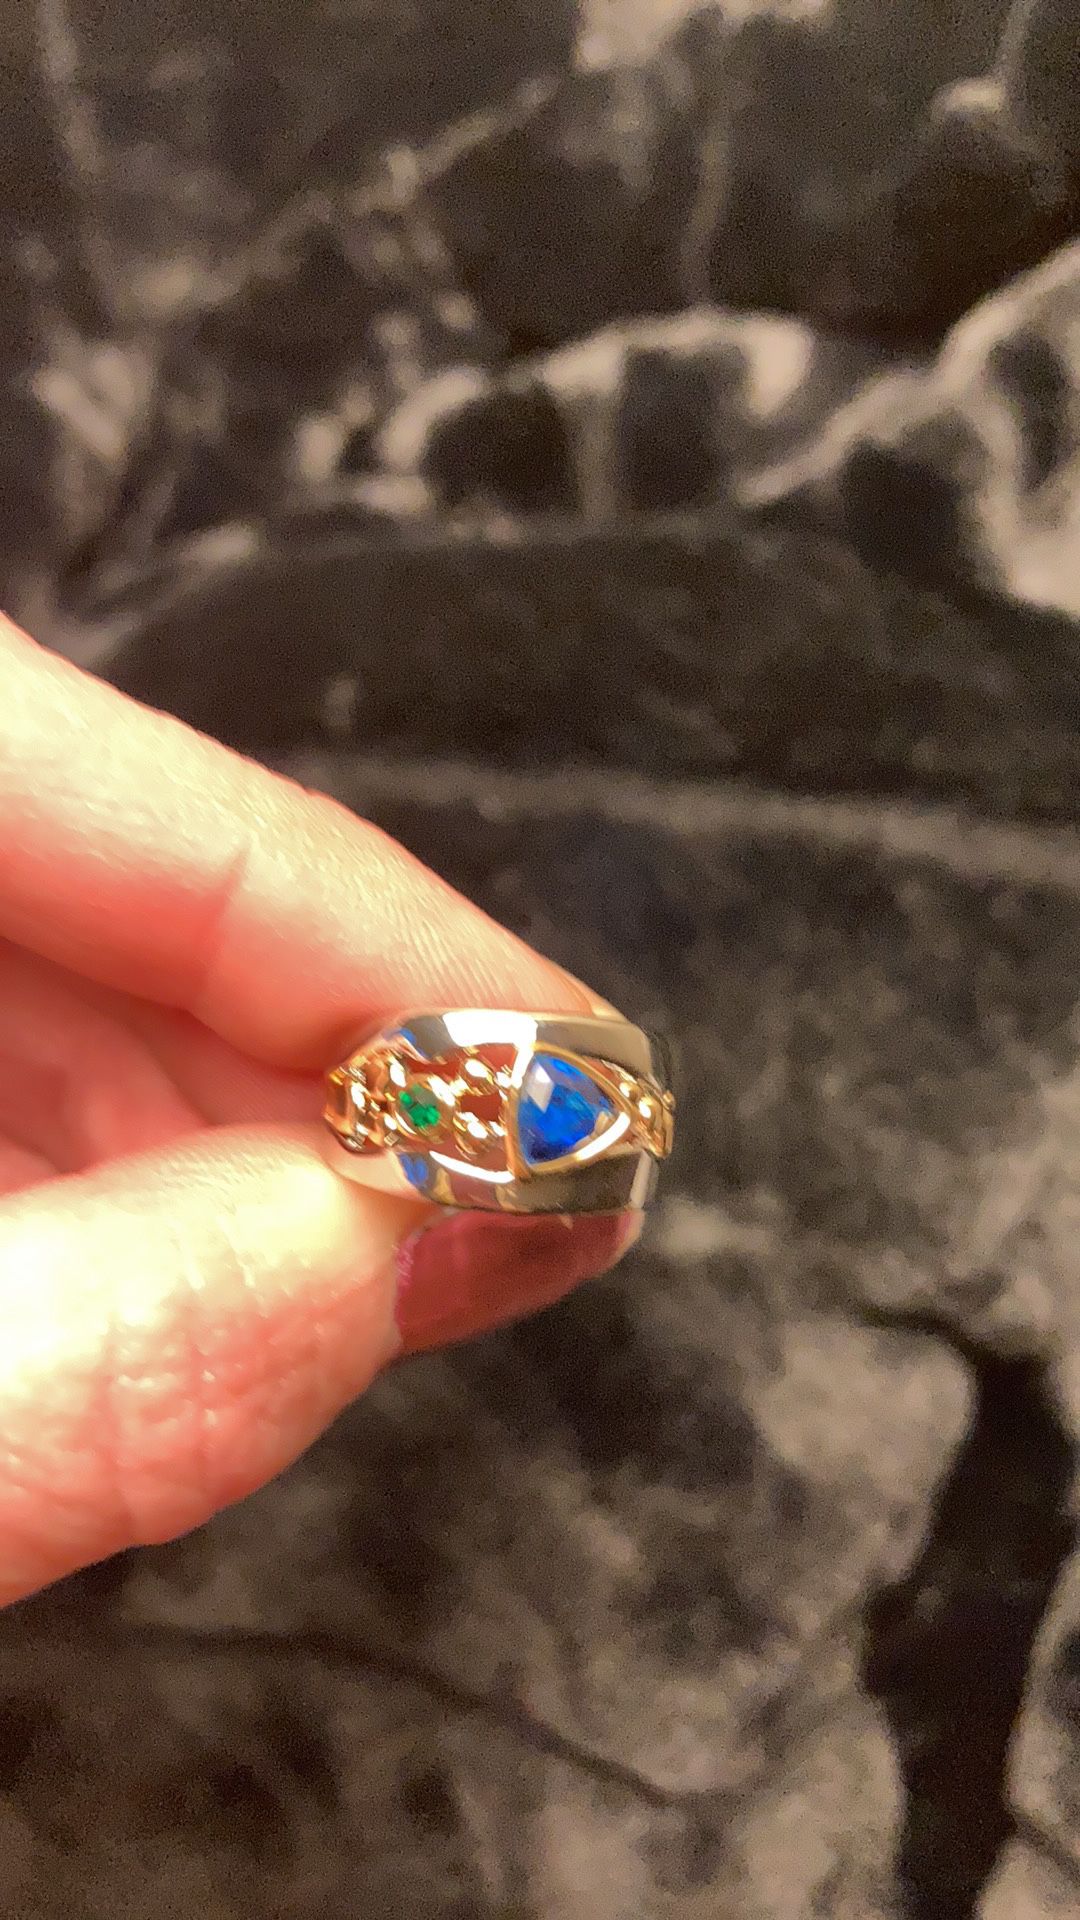 Ring Size 6 With Blue And Green Stone